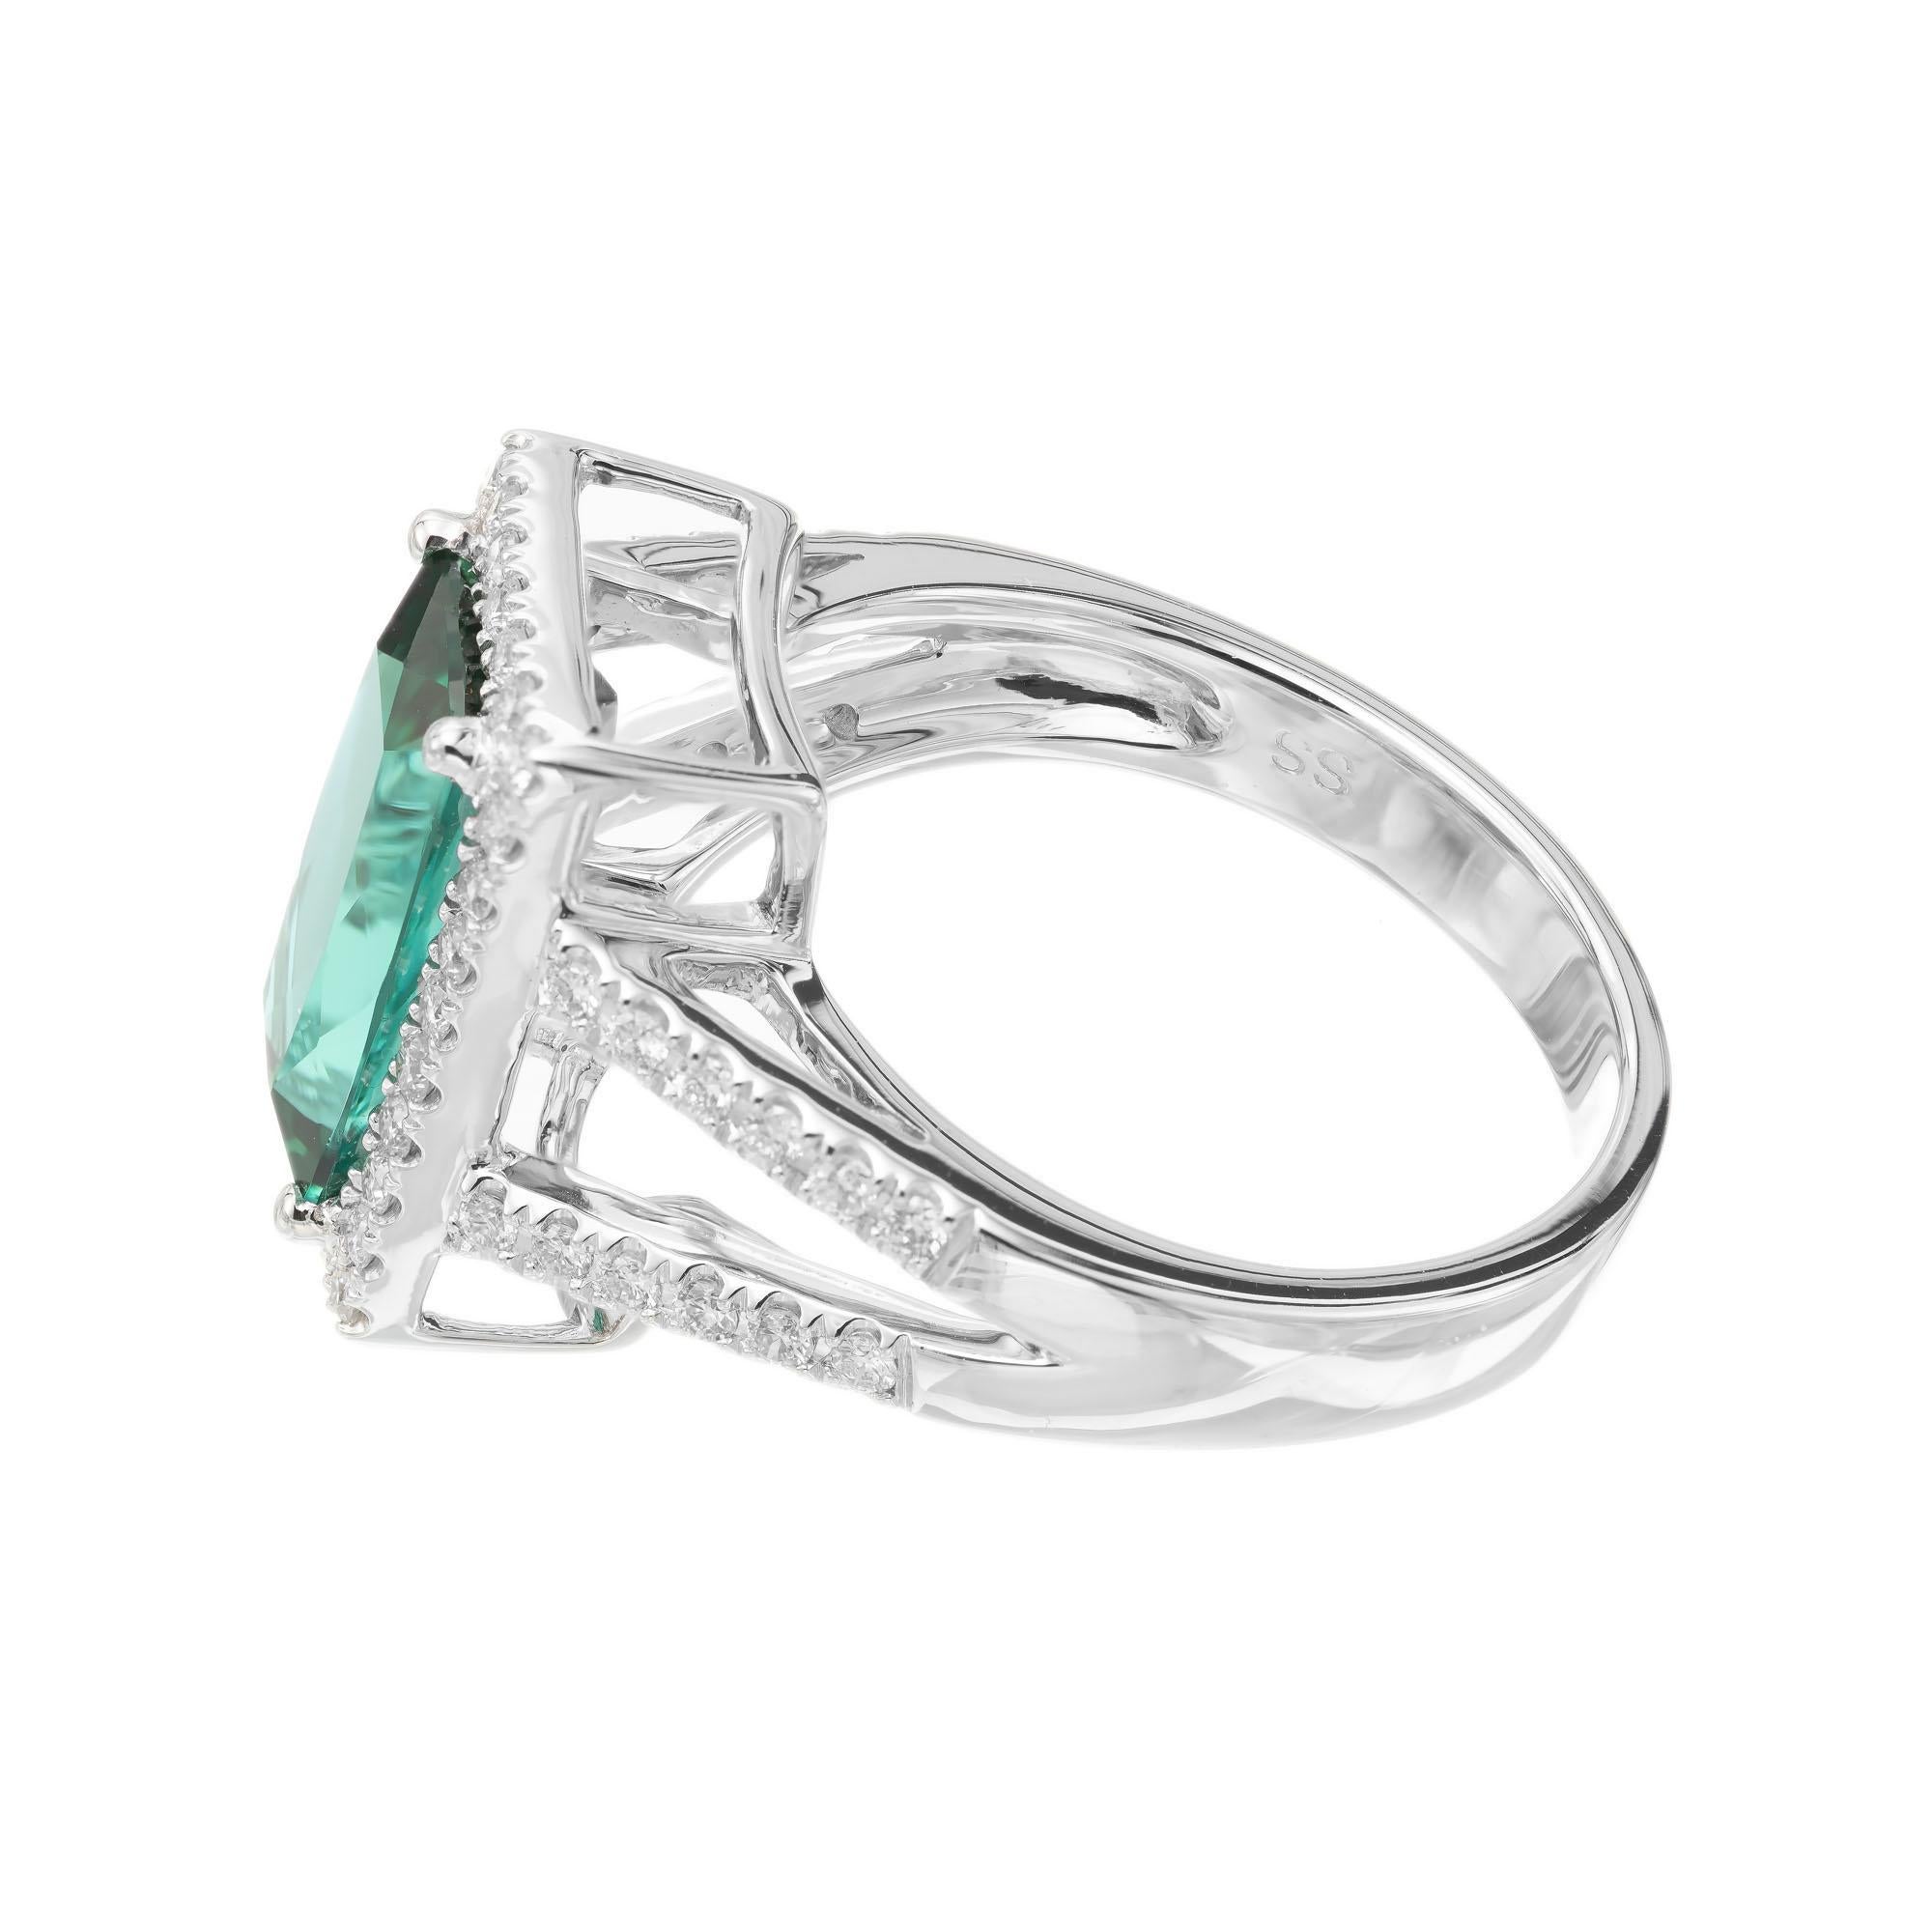 Peter Suchy 3.10 Carat Tourmaline Diamond Halo White Gold Cocktail Ring In New Condition For Sale In Stamford, CT